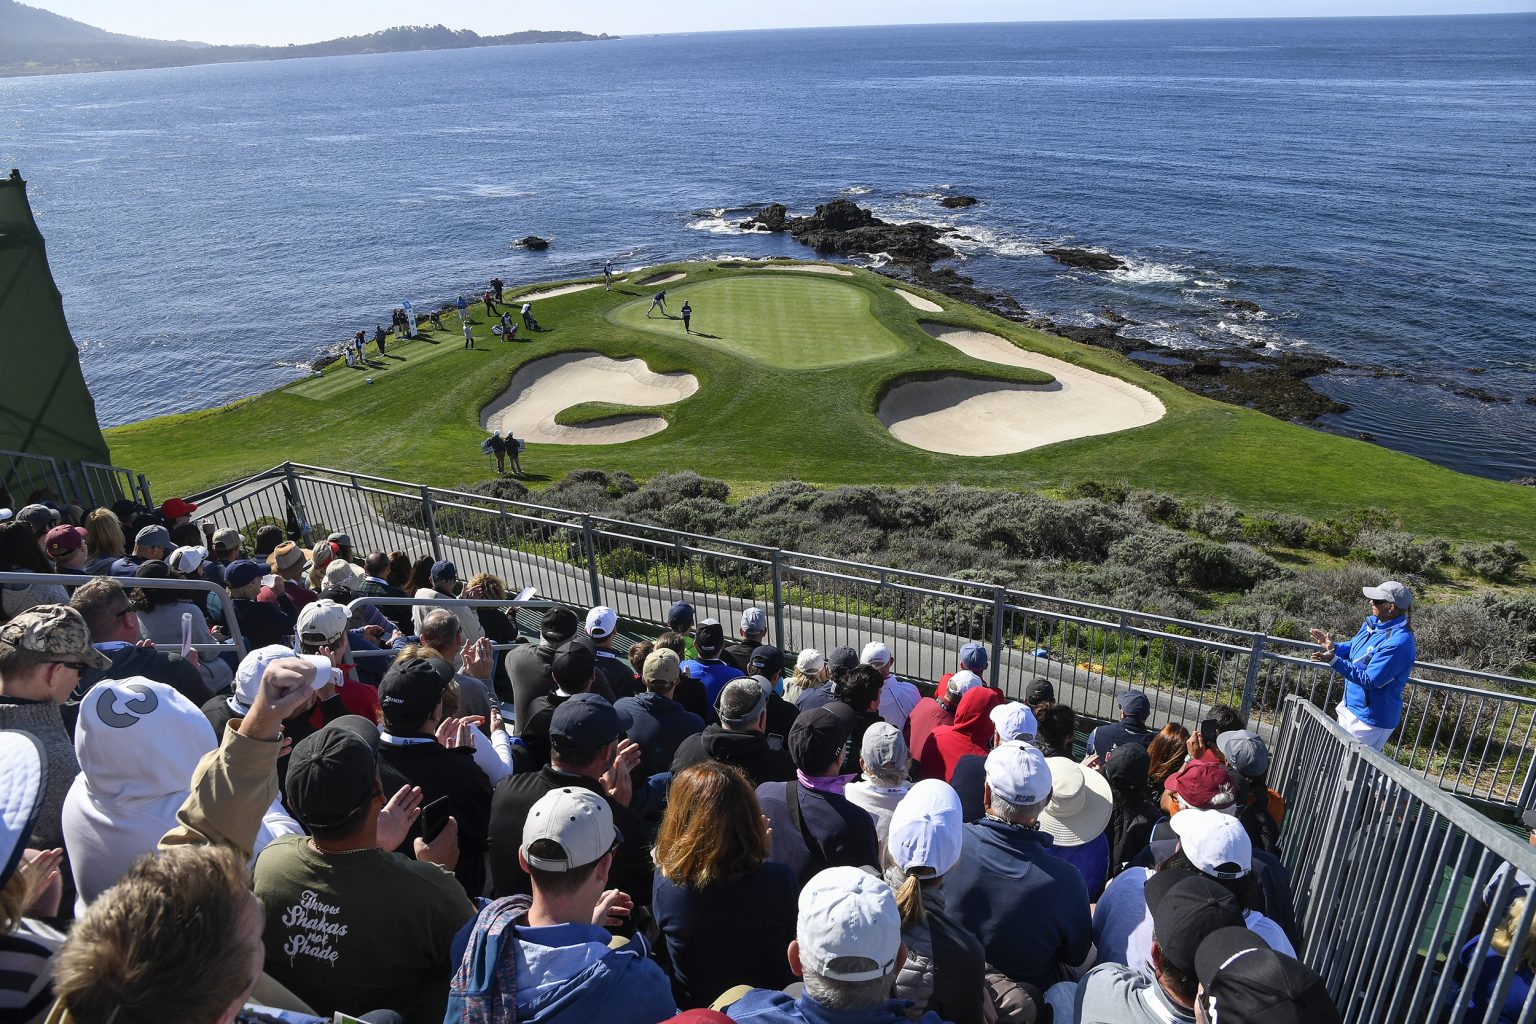 Spectator Guide Everything You Need to Know to Attend The 2020 ATandT Pebble Beach Pro-Am